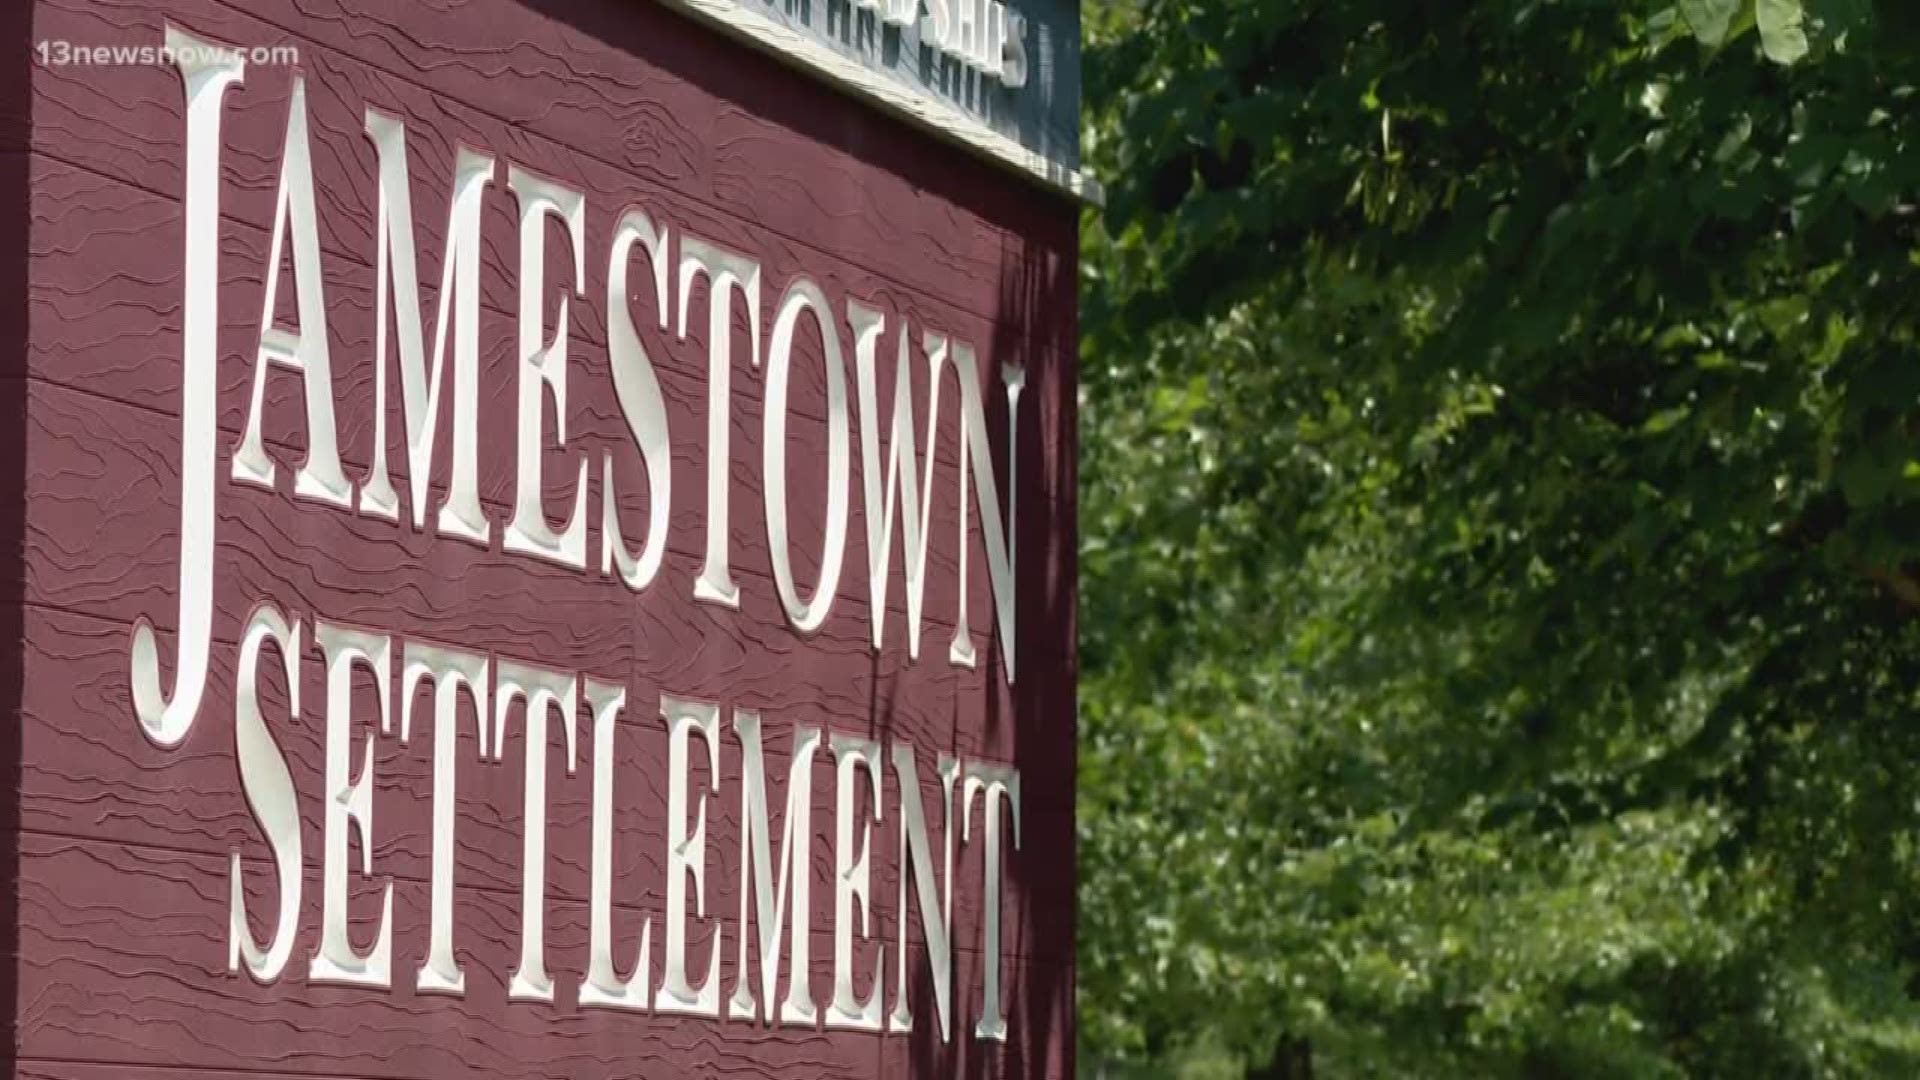 President Donald Trump is visiting Jamestown to celebrate the First Legislative Assembly in Jamestown. The Virginia Legislative Black Caucus announced they would boycott the event because of the President's attendance.